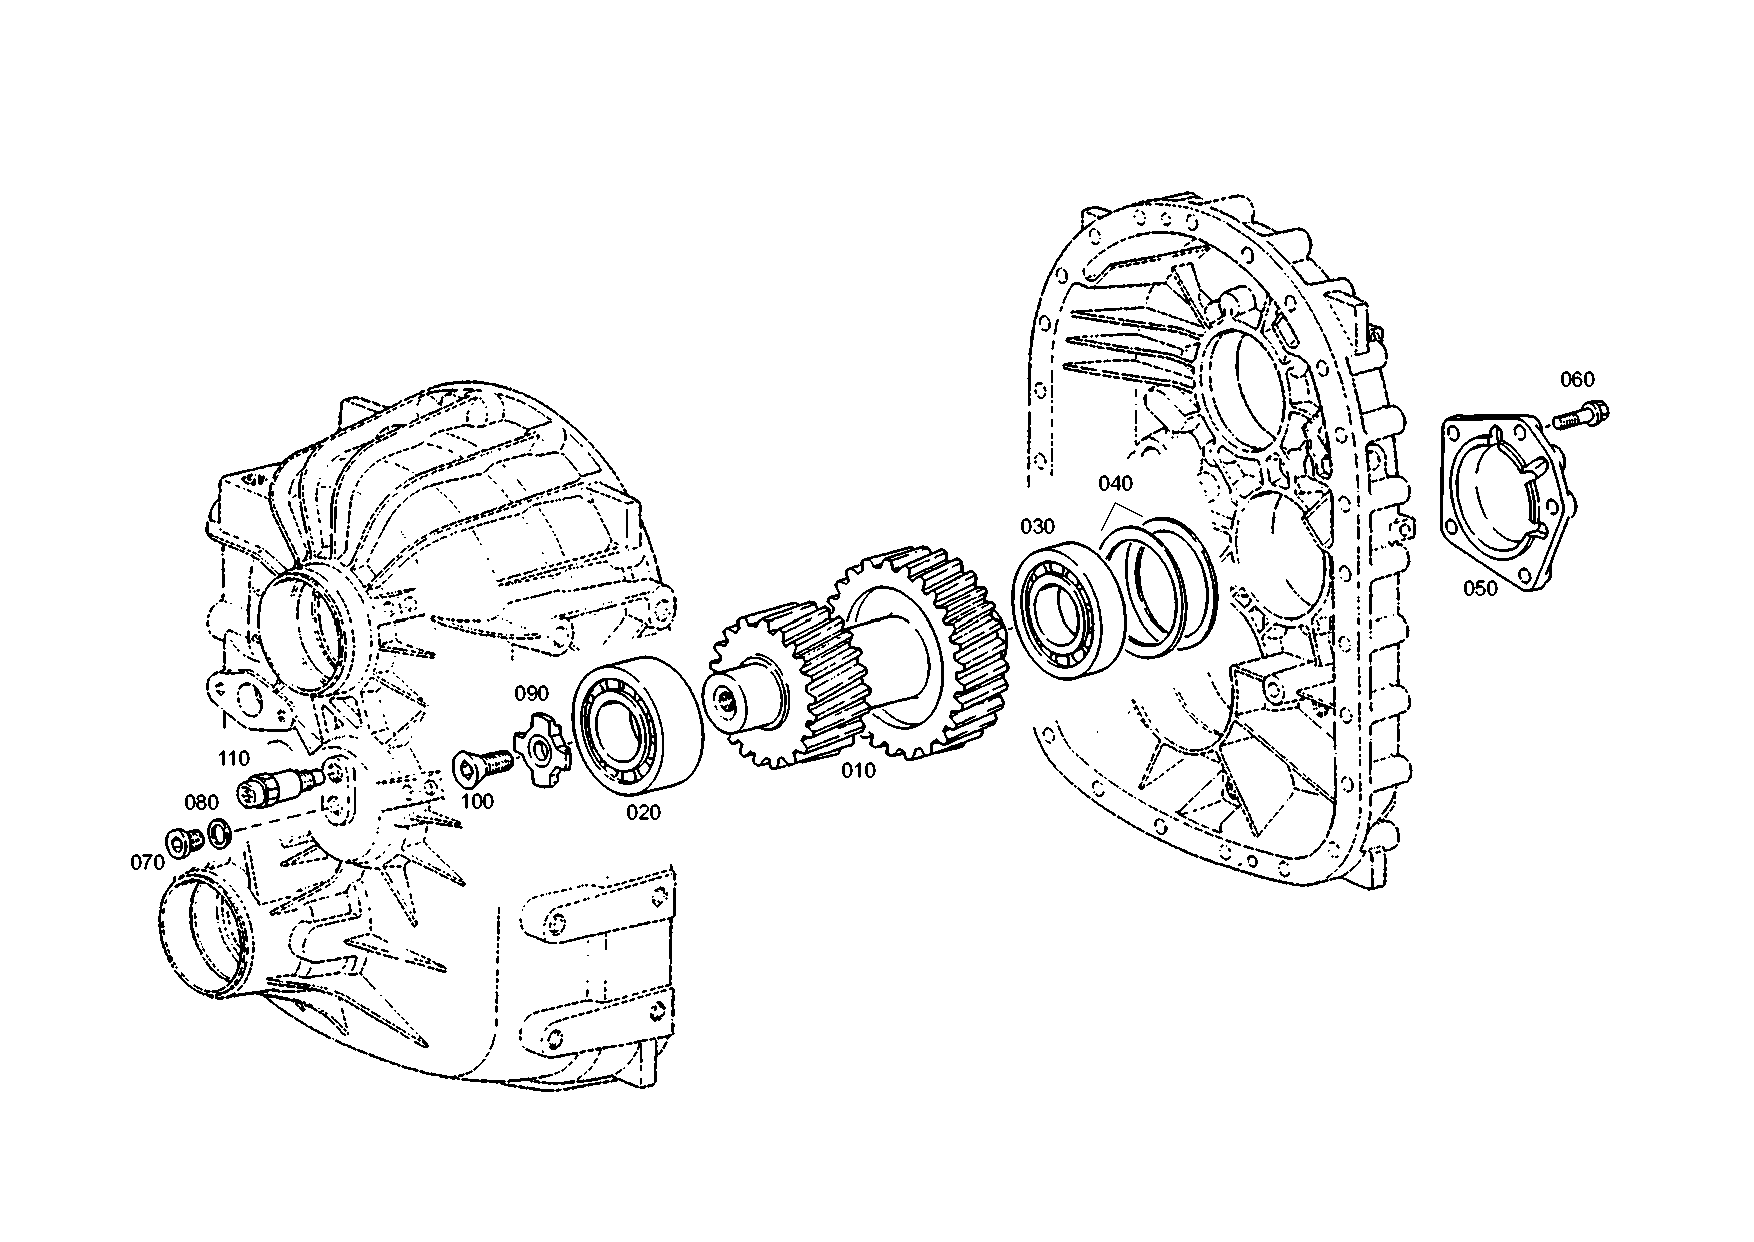 drawing for MARMON Herring MVG751061 - DOUBLE GEAR (figure 5)